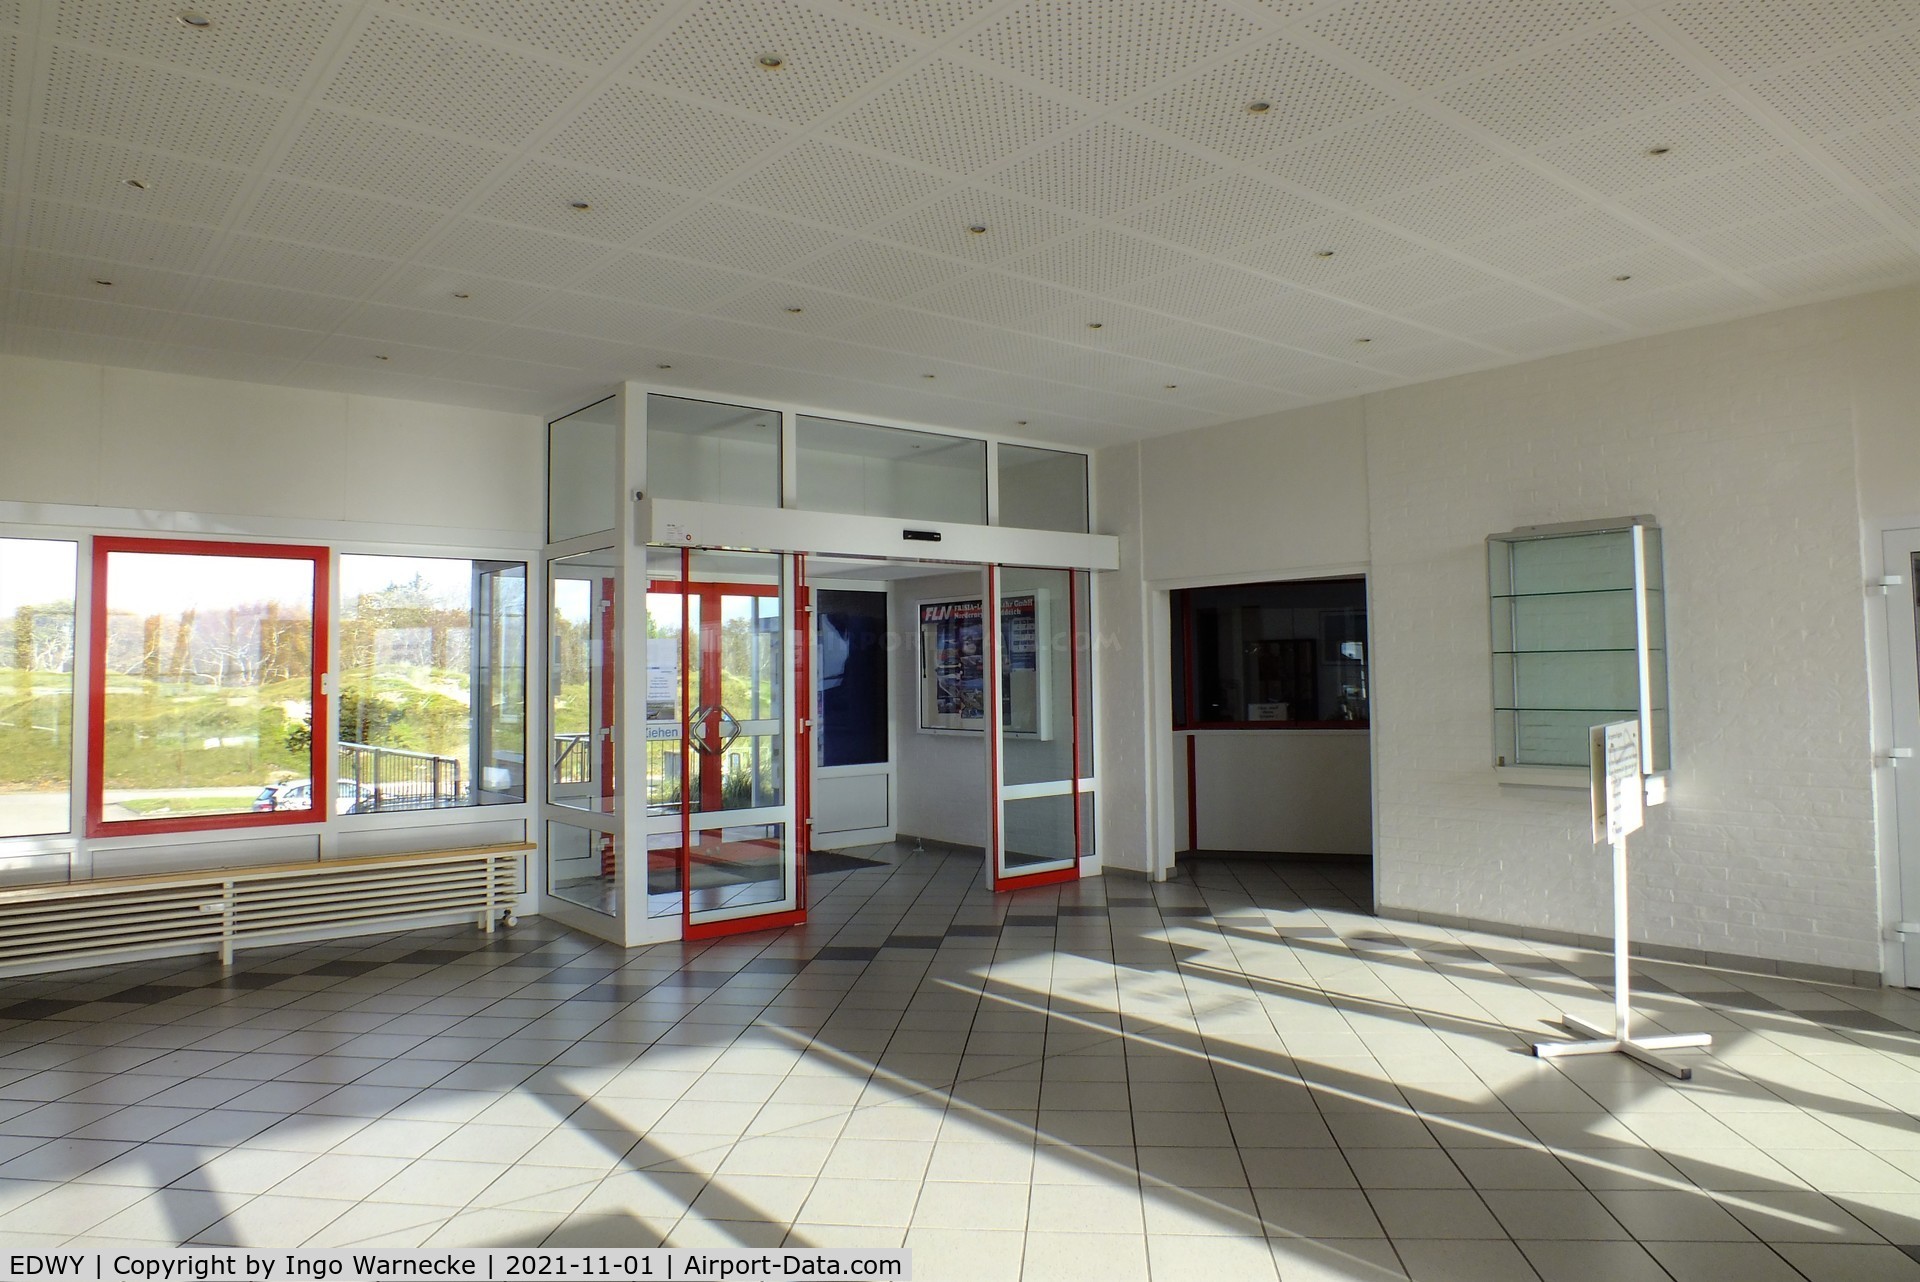 Norderney Airport, Norderney Germany (EDWY) - inside the terminal at Norderney airfield